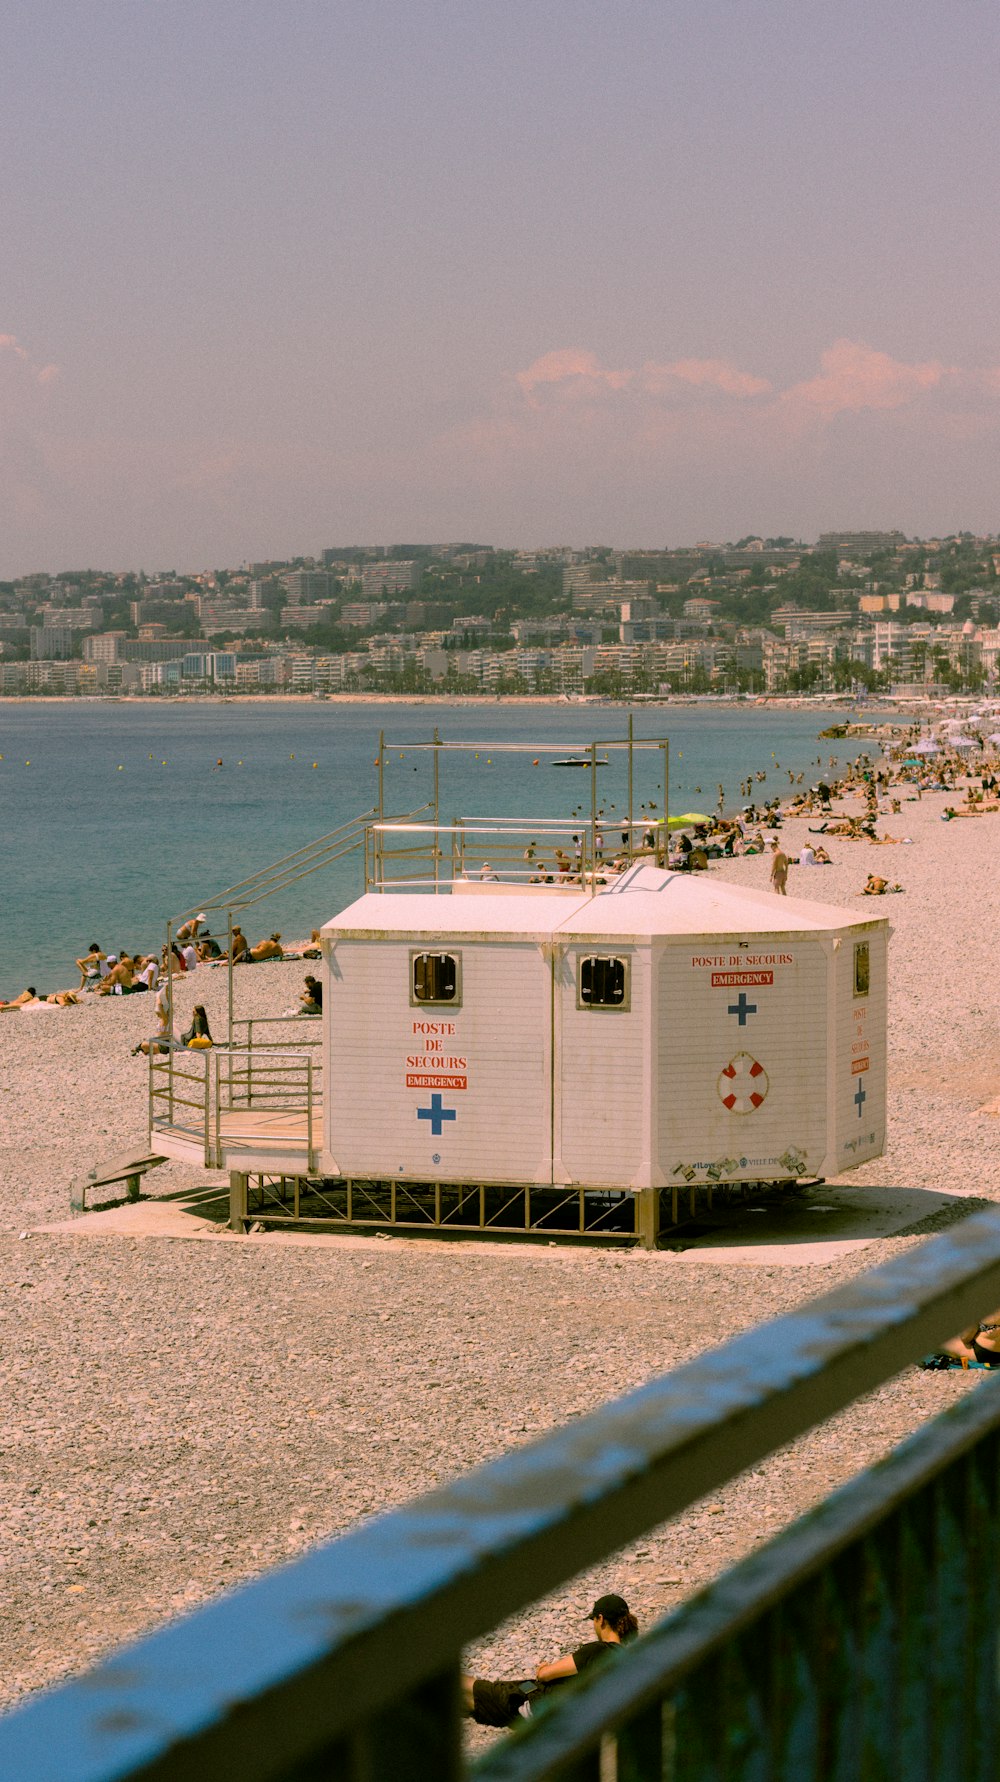 a lifeguard station on a beach next to a body of water